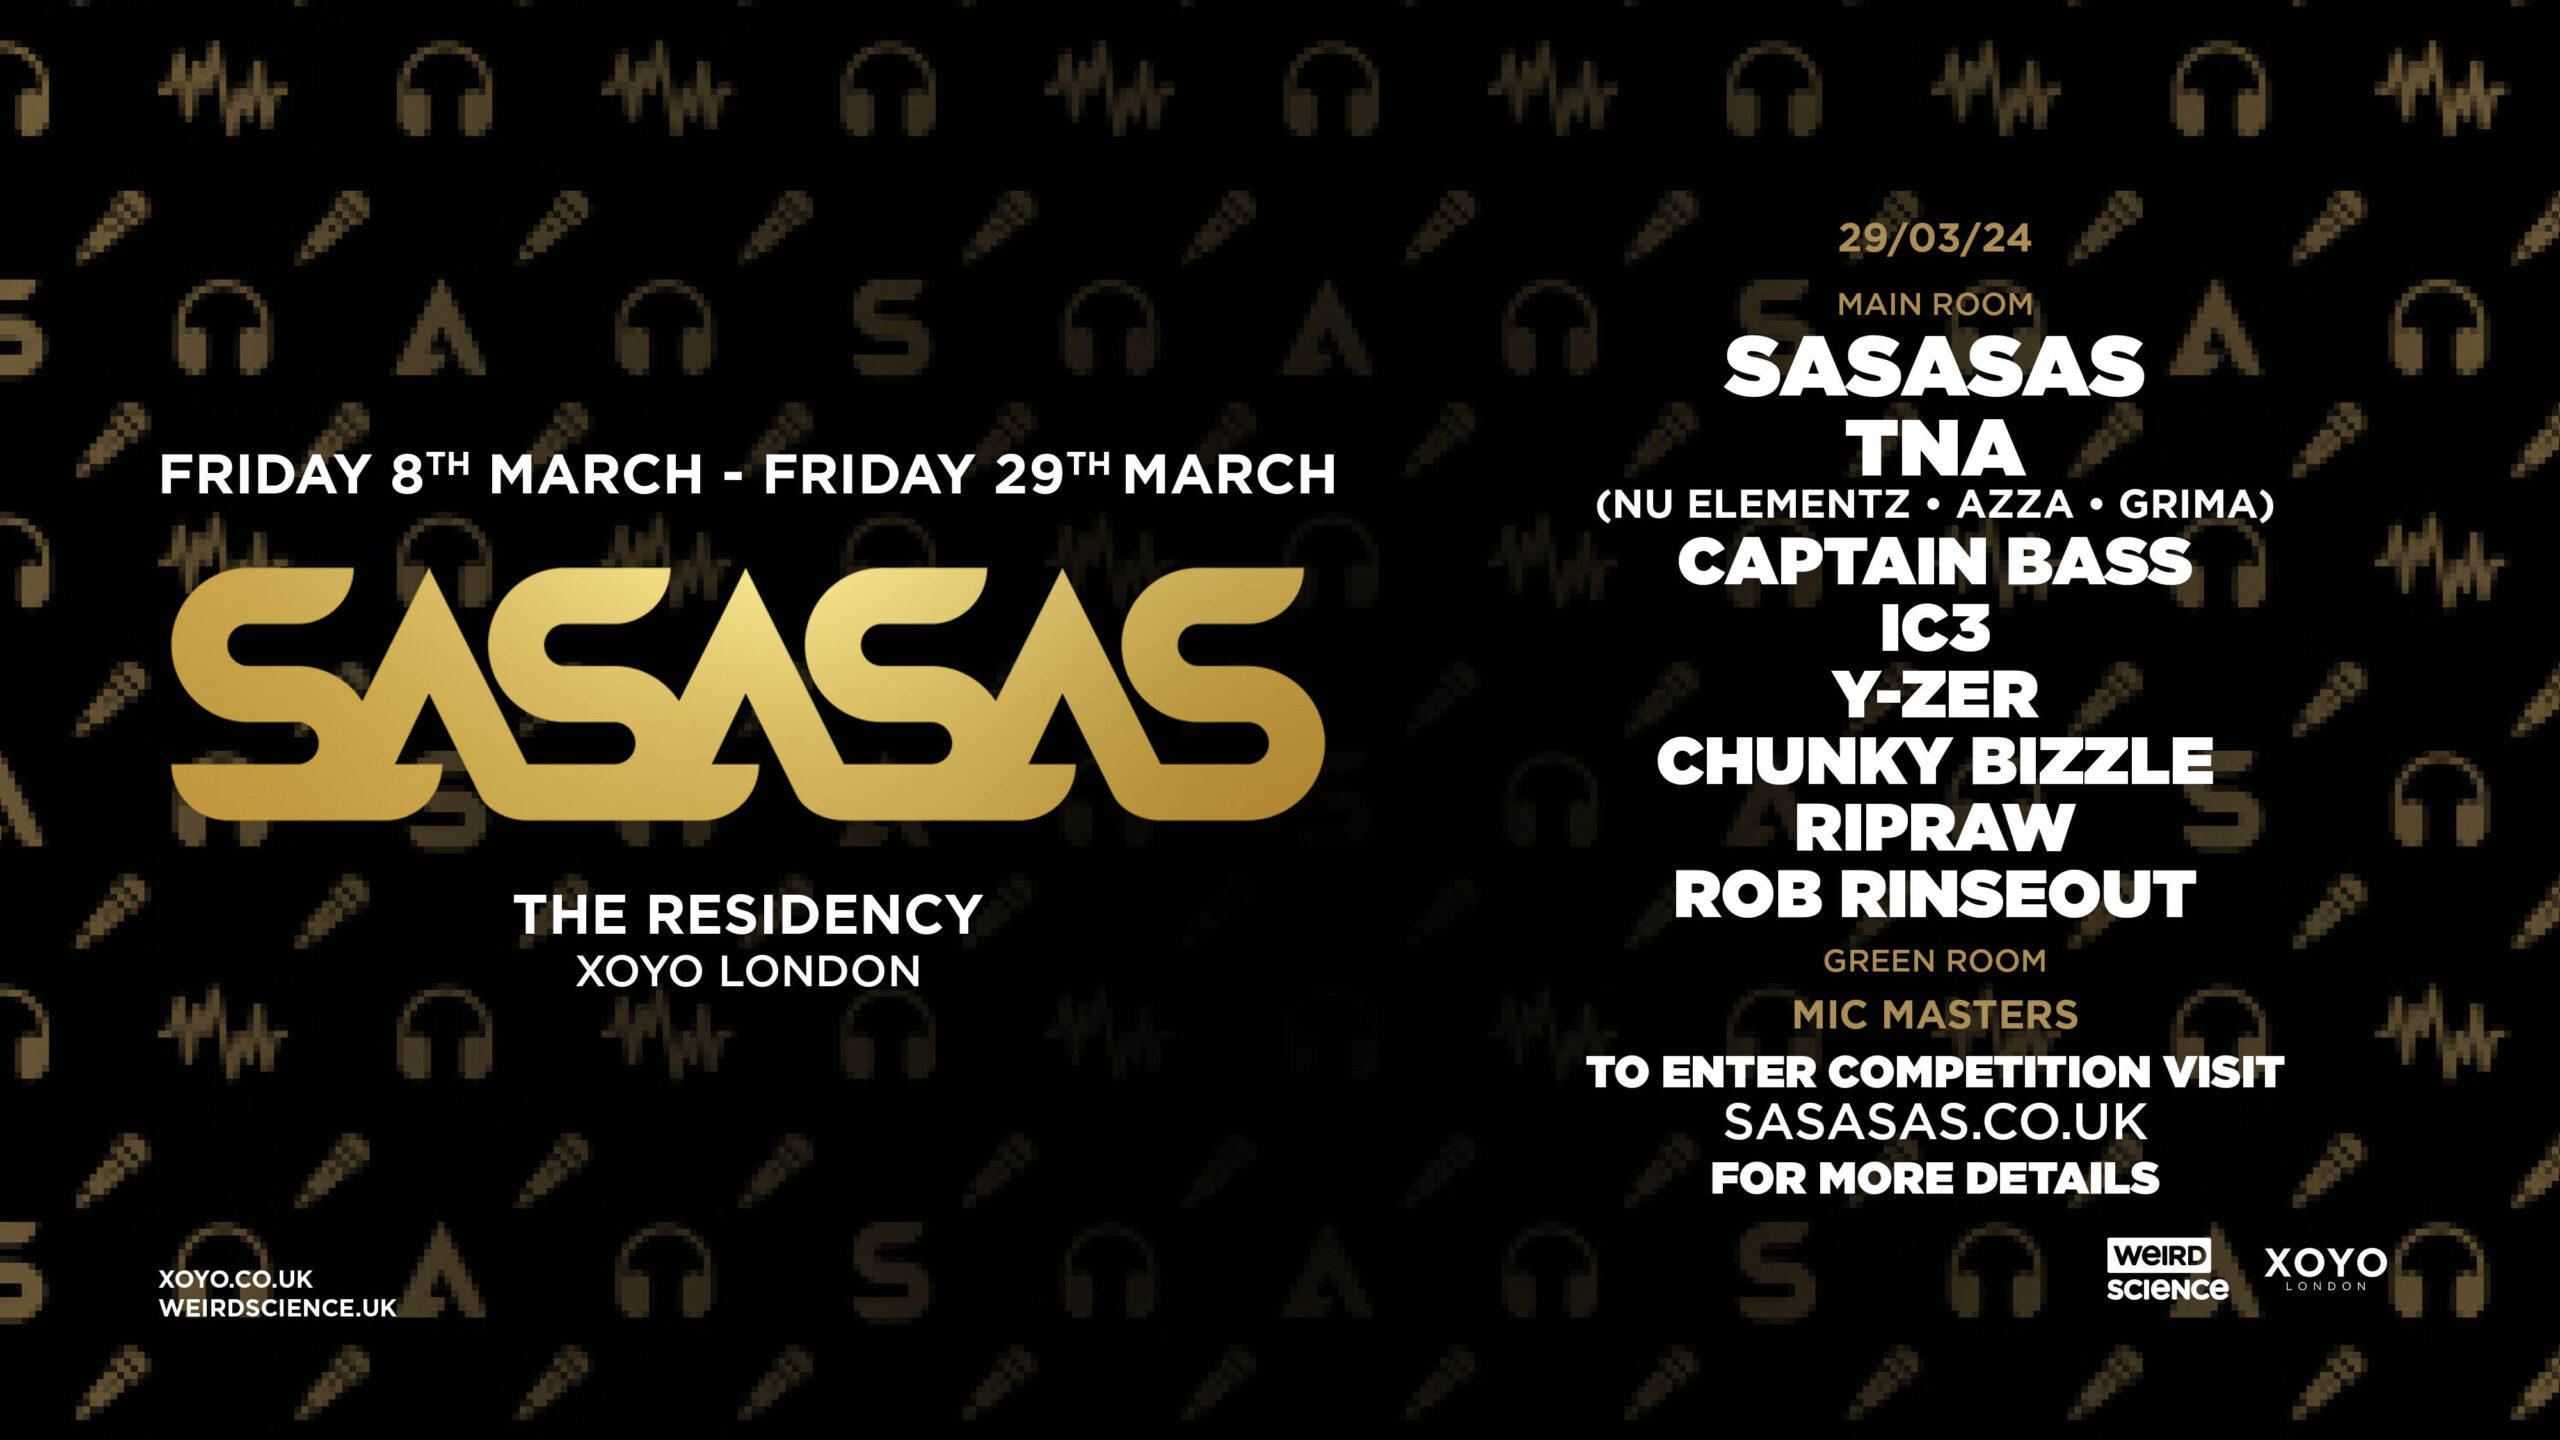 Join us for the FINAL Friday takeover by SASASAS at XOYO London!